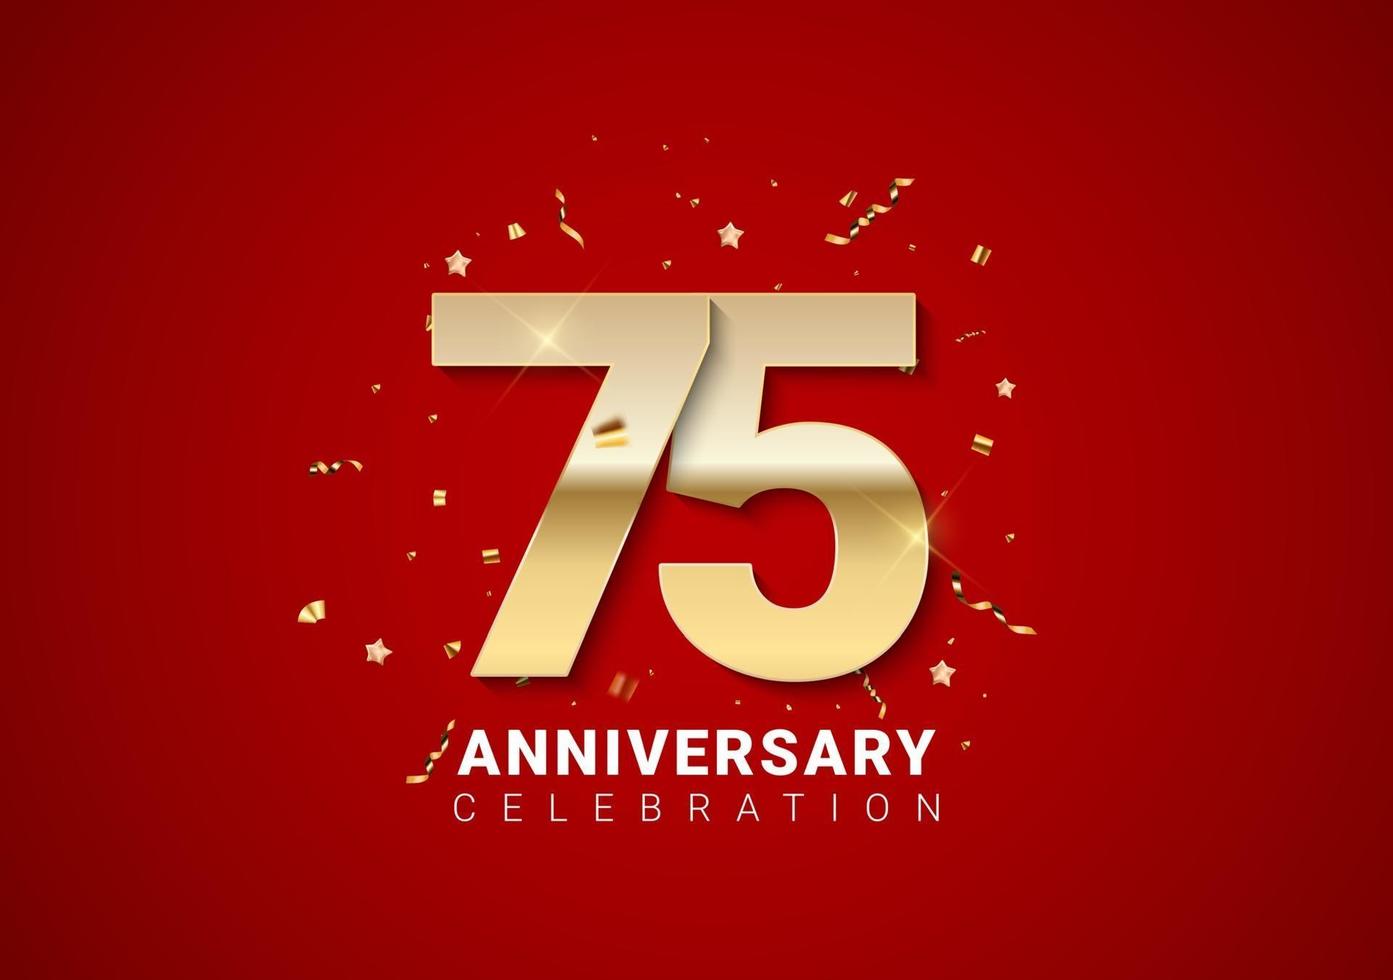 75 anniversary background with golden numbers, confetti, stars vector